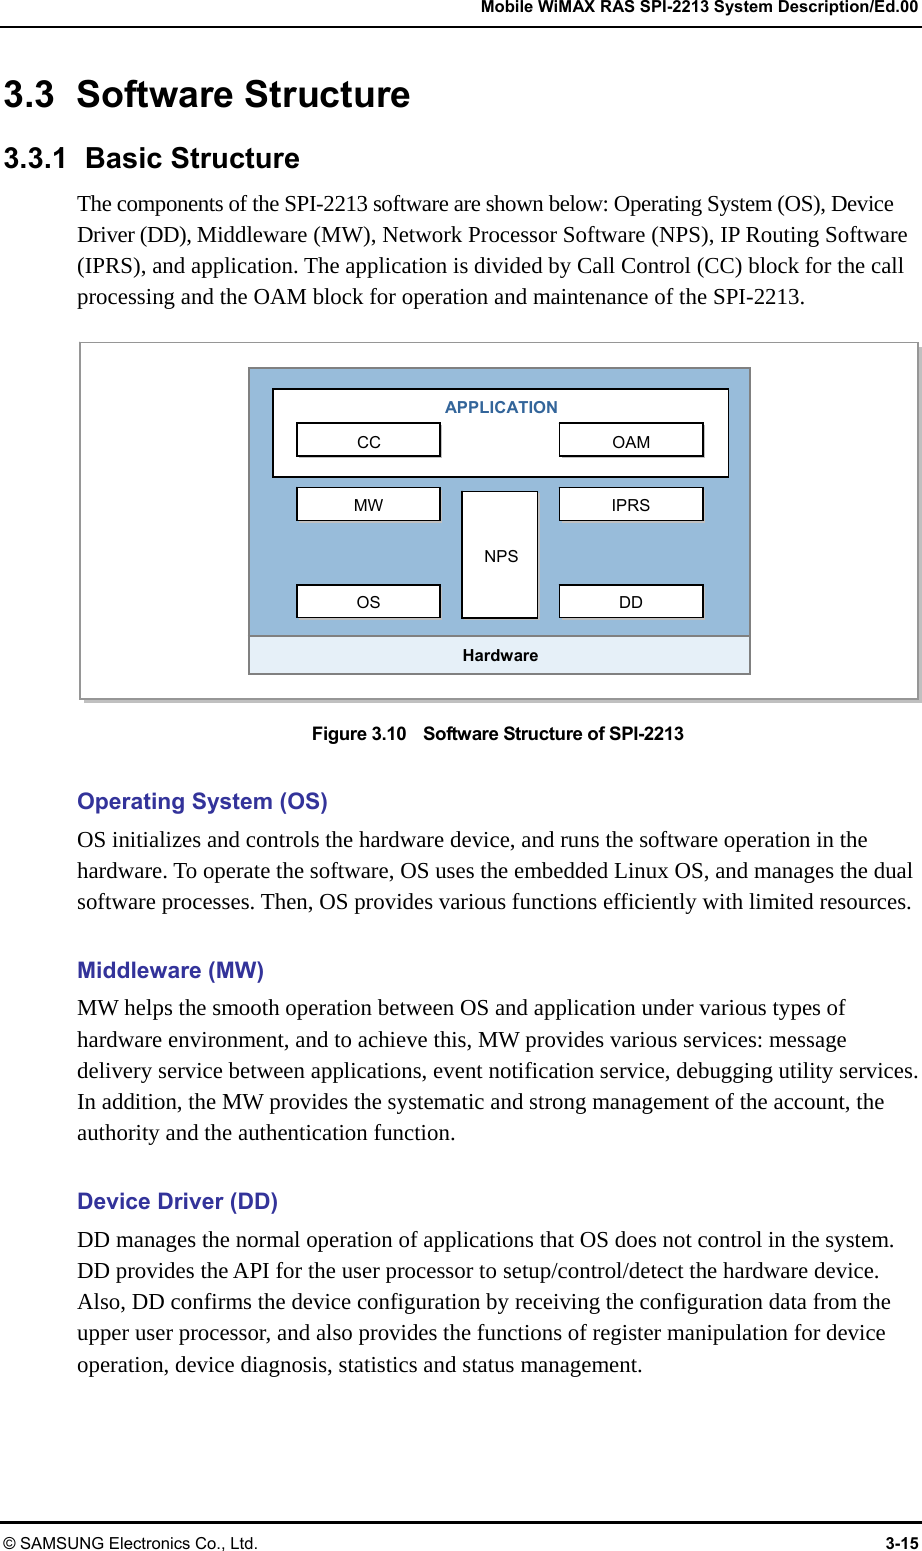   Mobile WiMAX RAS SPI-2213 System Description/Ed.00 © SAMSUNG Electronics Co., Ltd.  3-15 3.3 Software Structure 3.3.1 Basic Structure The components of the SPI-2213 software are shown below: Operating System (OS), Device Driver (DD), Middleware (MW), Network Processor Software (NPS), IP Routing Software (IPRS), and application. The application is divided by Call Control (CC) block for the call processing and the OAM block for operation and maintenance of the SPI-2213.  Figure 3.10    Software Structure of SPI-2213  Operating System (OS) OS initializes and controls the hardware device, and runs the software operation in the hardware. To operate the software, OS uses the embedded Linux OS, and manages the dual software processes. Then, OS provides various functions efficiently with limited resources.  Middleware (MW) MW helps the smooth operation between OS and application under various types of hardware environment, and to achieve this, MW provides various services: message delivery service between applications, event notification service, debugging utility services. In addition, the MW provides the systematic and strong management of the account, the authority and the authentication function.  Device Driver (DD) DD manages the normal operation of applications that OS does not control in the system. DD provides the API for the user processor to setup/control/detect the hardware device. Also, DD confirms the device configuration by receiving the configuration data from the upper user processor, and also provides the functions of register manipulation for device operation, device diagnosis, statistics and status management.  MW IPRSOS DD NPS Hardware OAMCC APPLICATION 